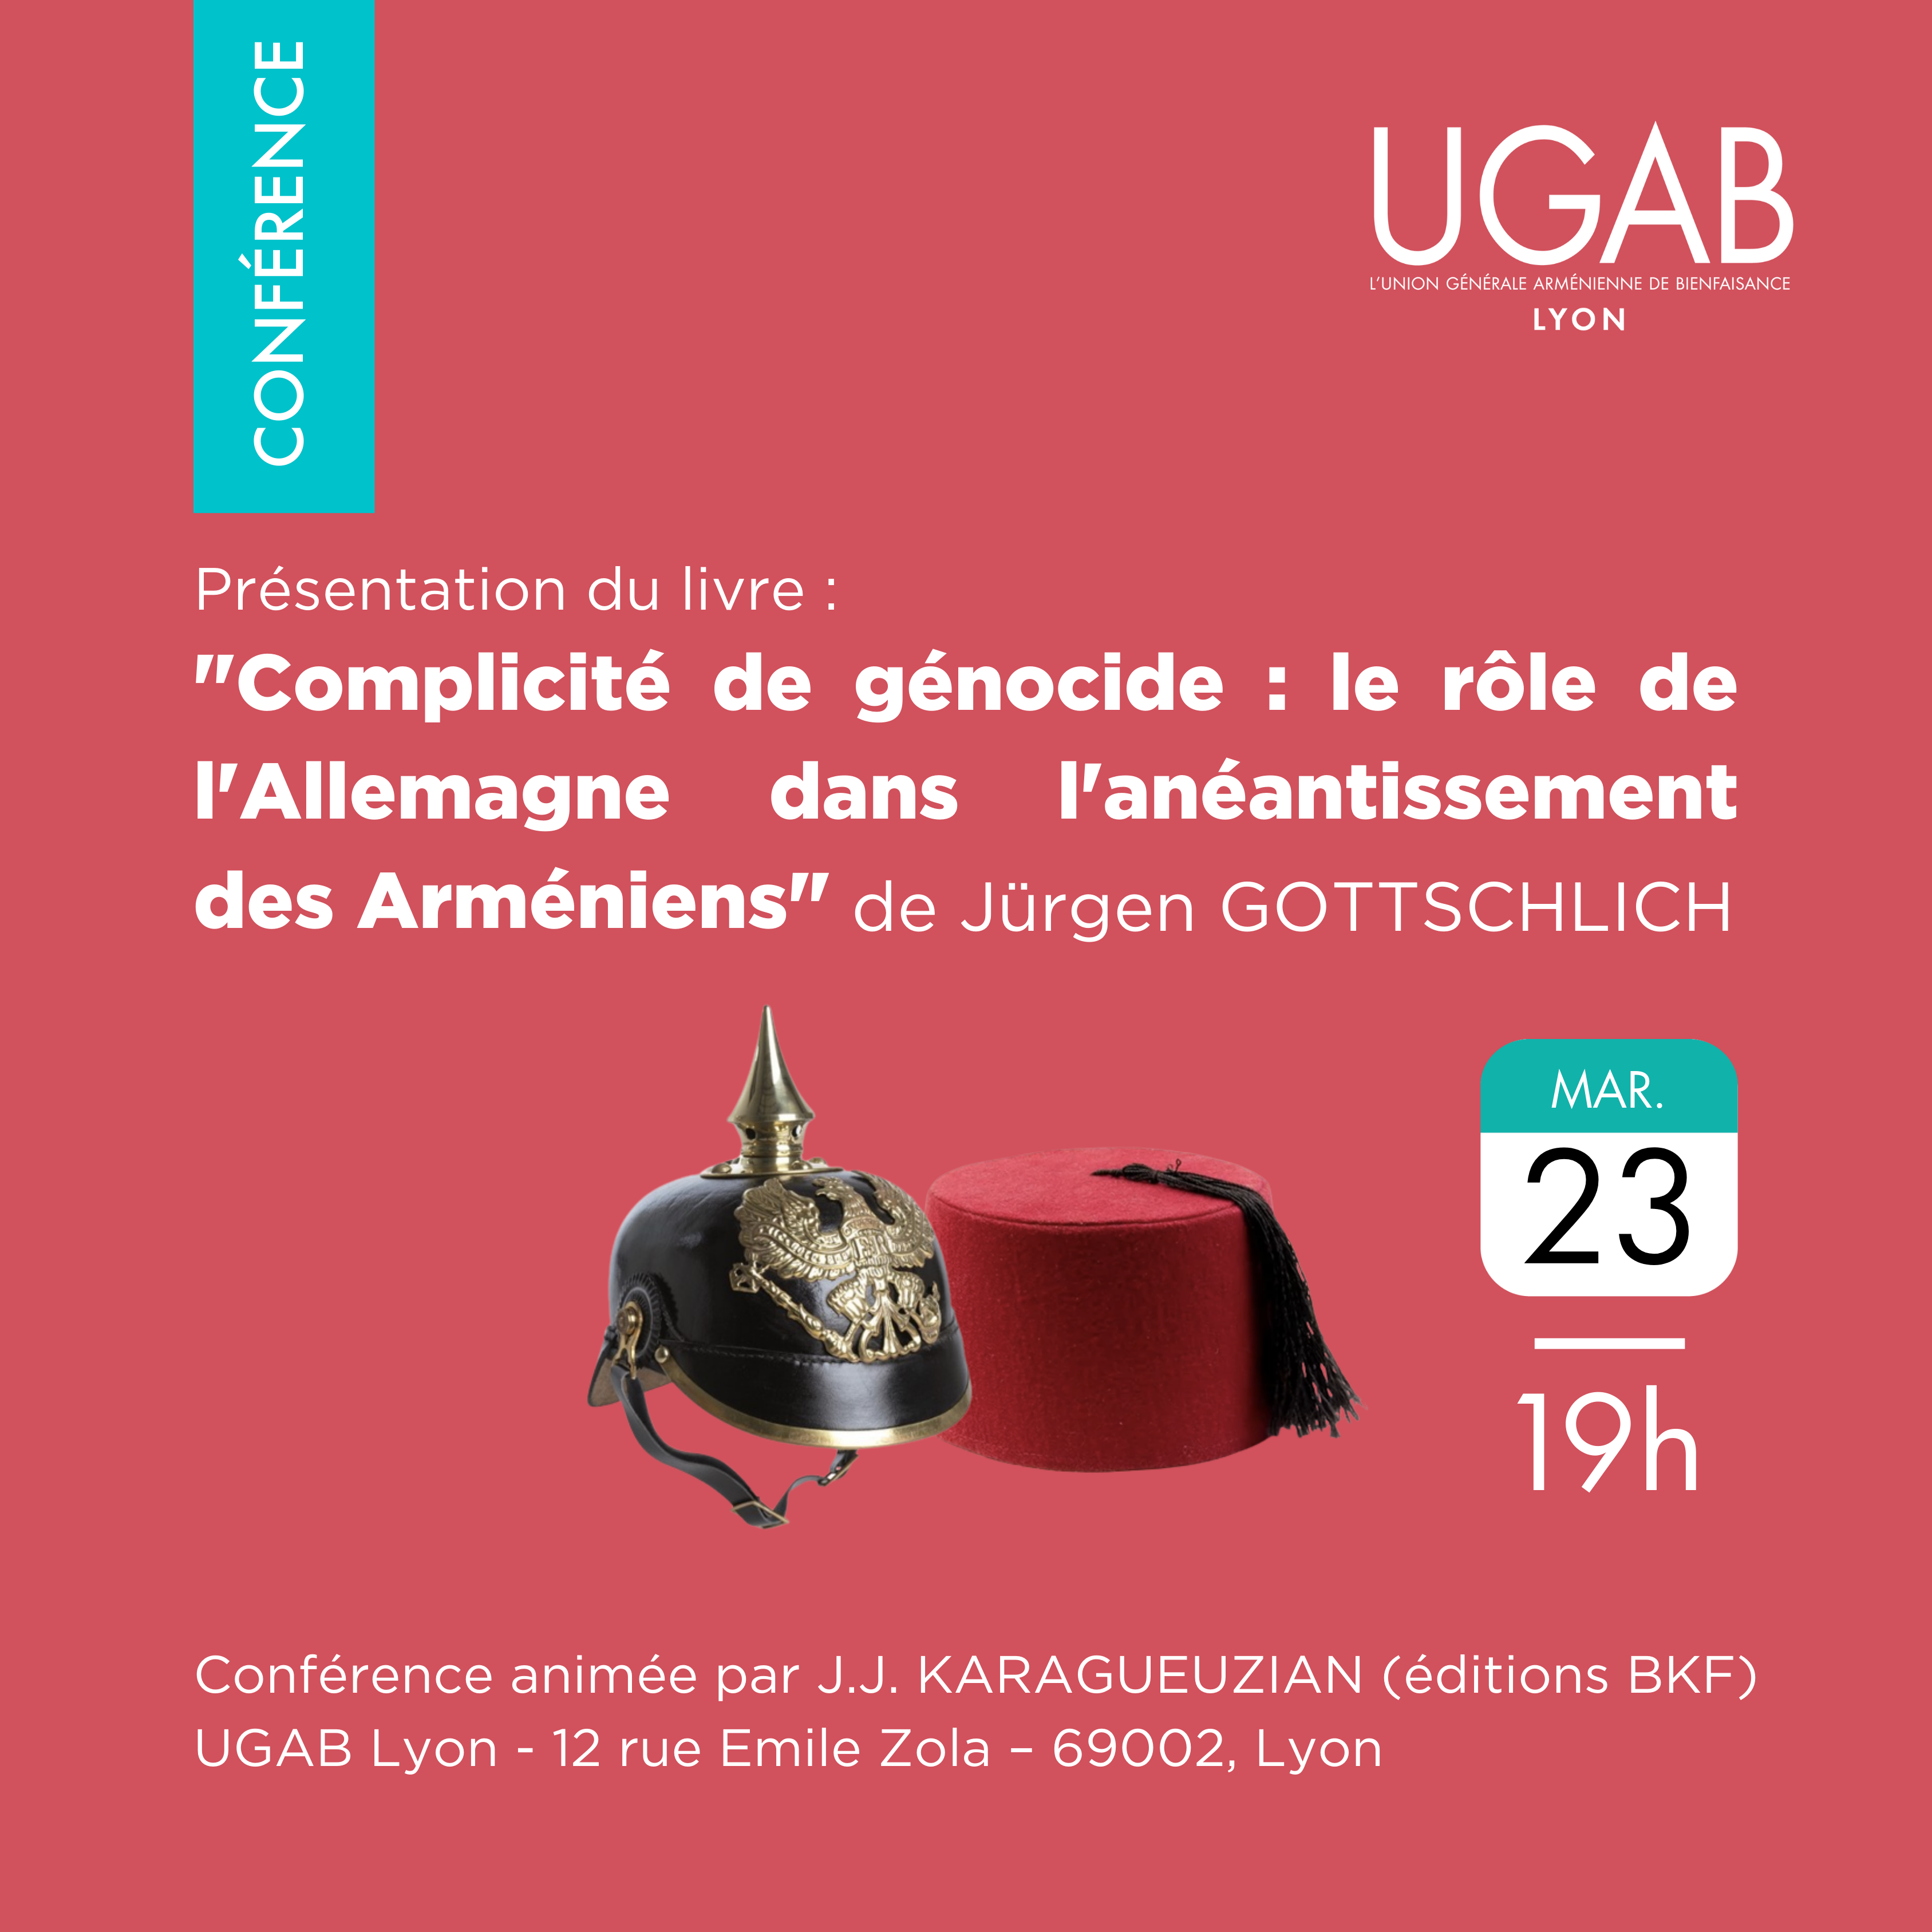 Presentation of the book "Complicity in Genocide"